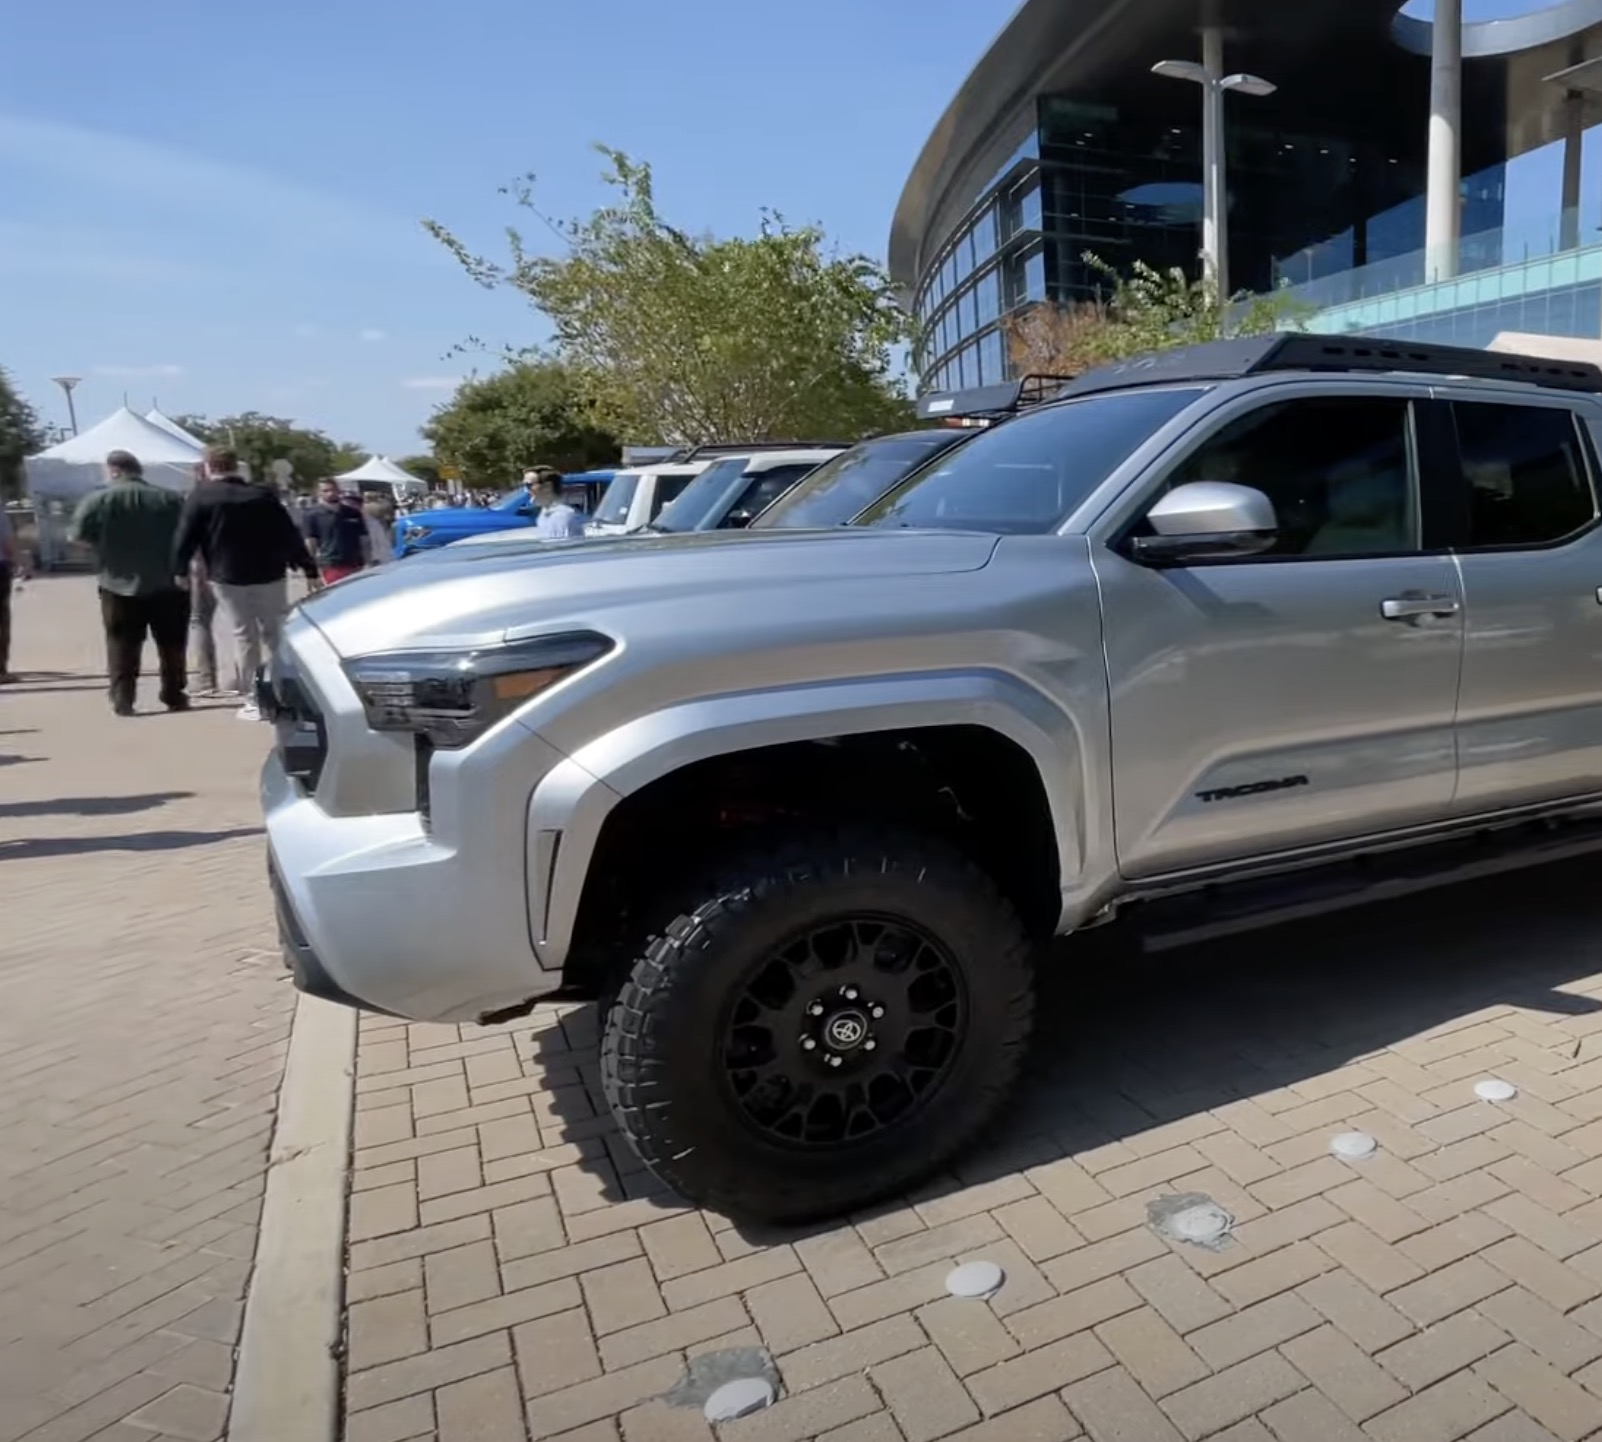 2024 Tacoma Official CELESTIAL SILVER METALLIC 2024 Tacoma Thread (4th Gen) Celestial Silver 2024 Tacom SR5 TRD Lift Kit 2.5 2.0 inches springs struts build 2